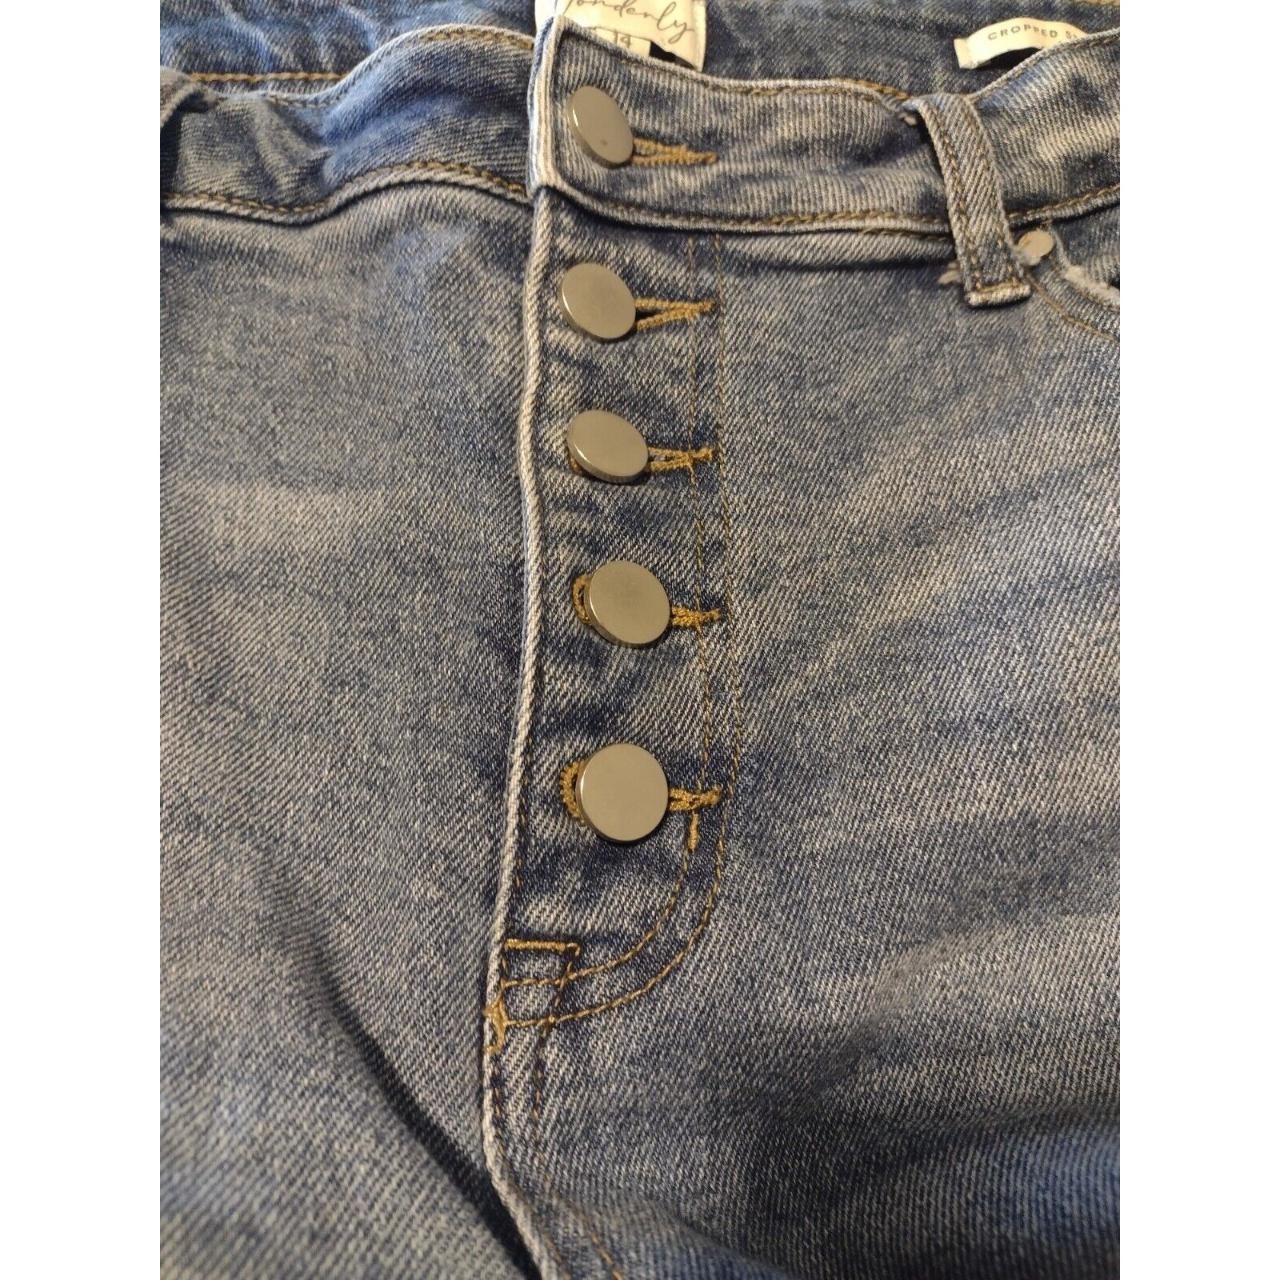 Wonderly Cropped Straight Leg Jeans Button Fly... - Depop